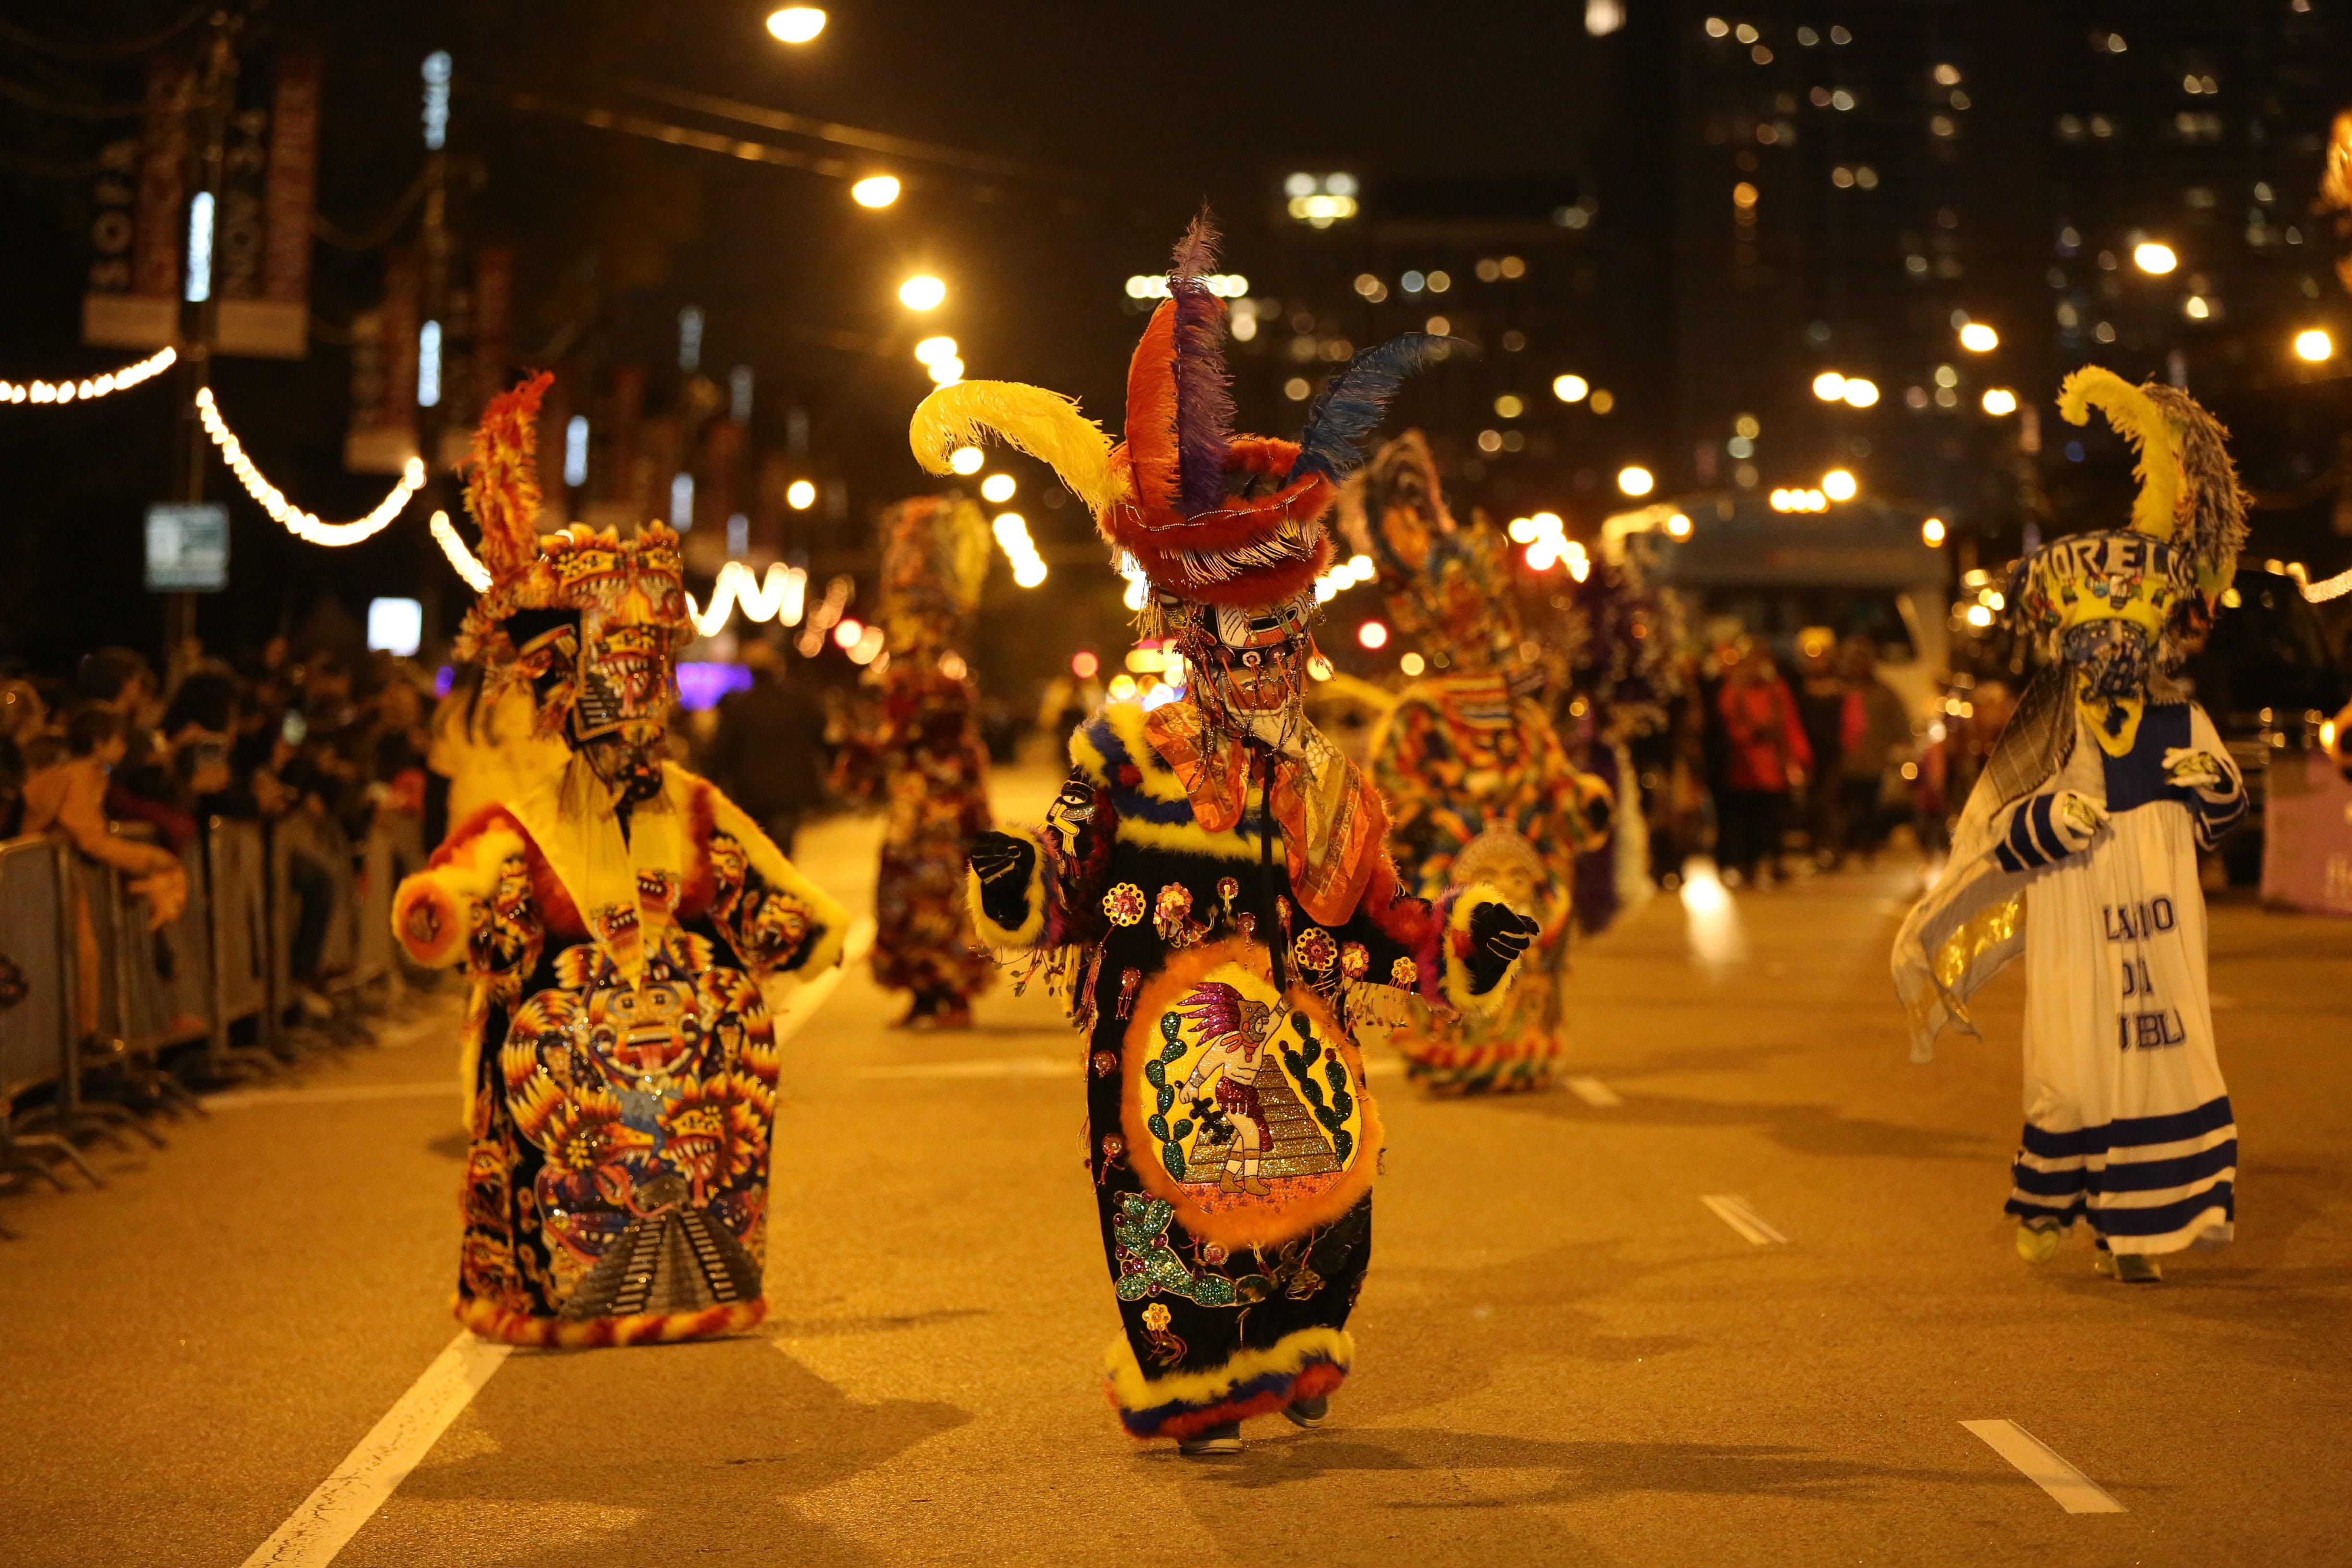 Spectacle after sundown: Don’t miss the Arts in the Dark parade Saturday.